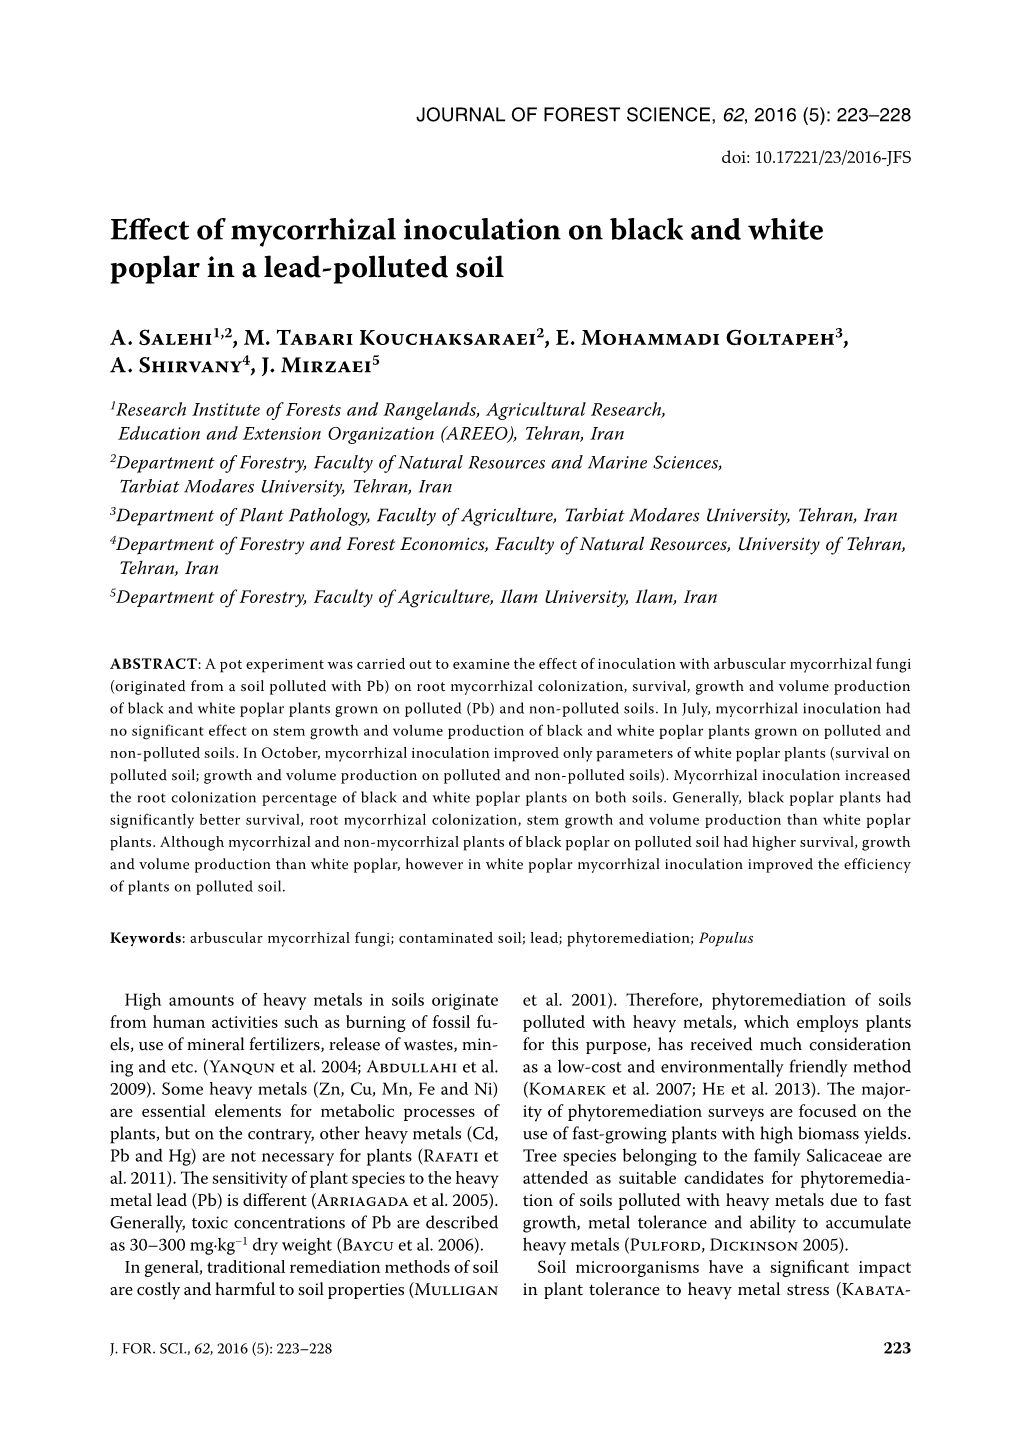 Effect of Mycorrhizal Inoculation on Black and White Poplar in a Lead-Polluted Soil